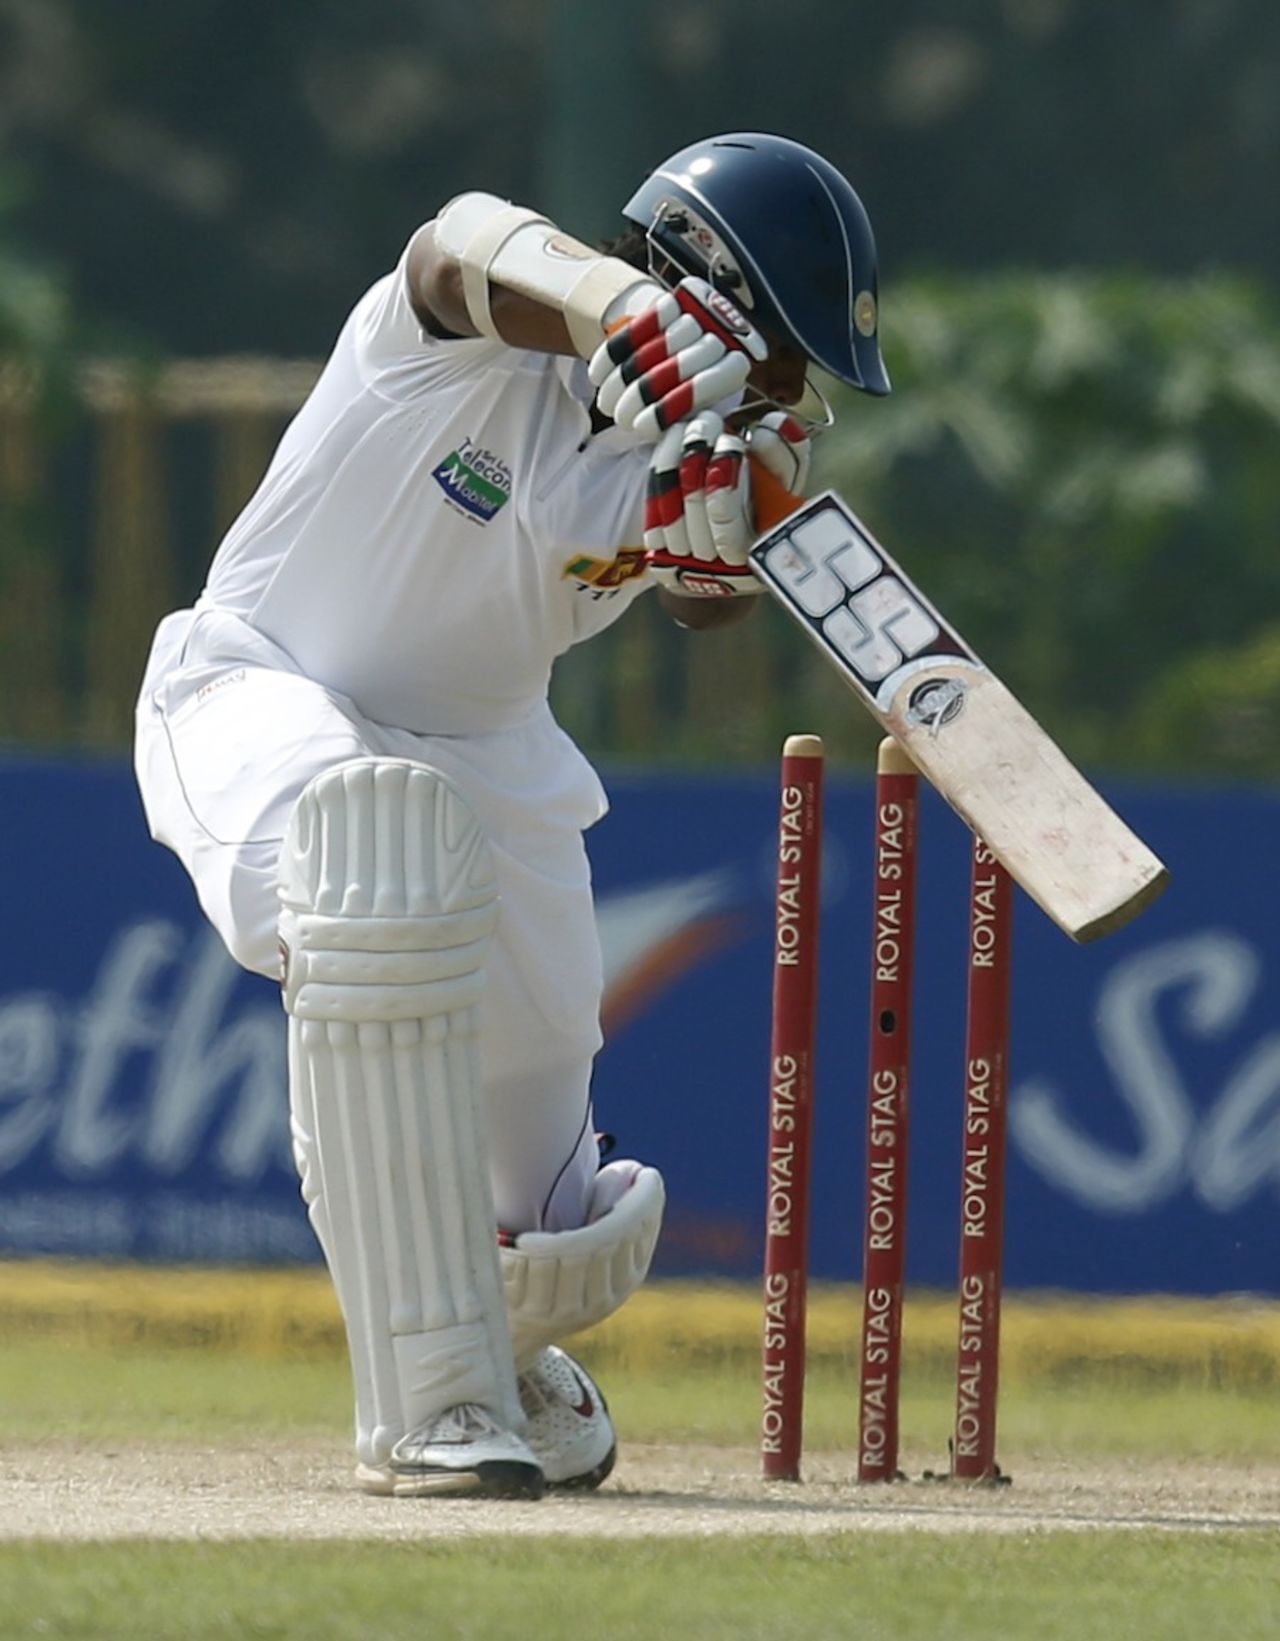 Tharanga Paranavitana was bowled in the first over, Sri Lanka v New Zealand, 1st Test, Galle, 2nd day, November 18, 2012